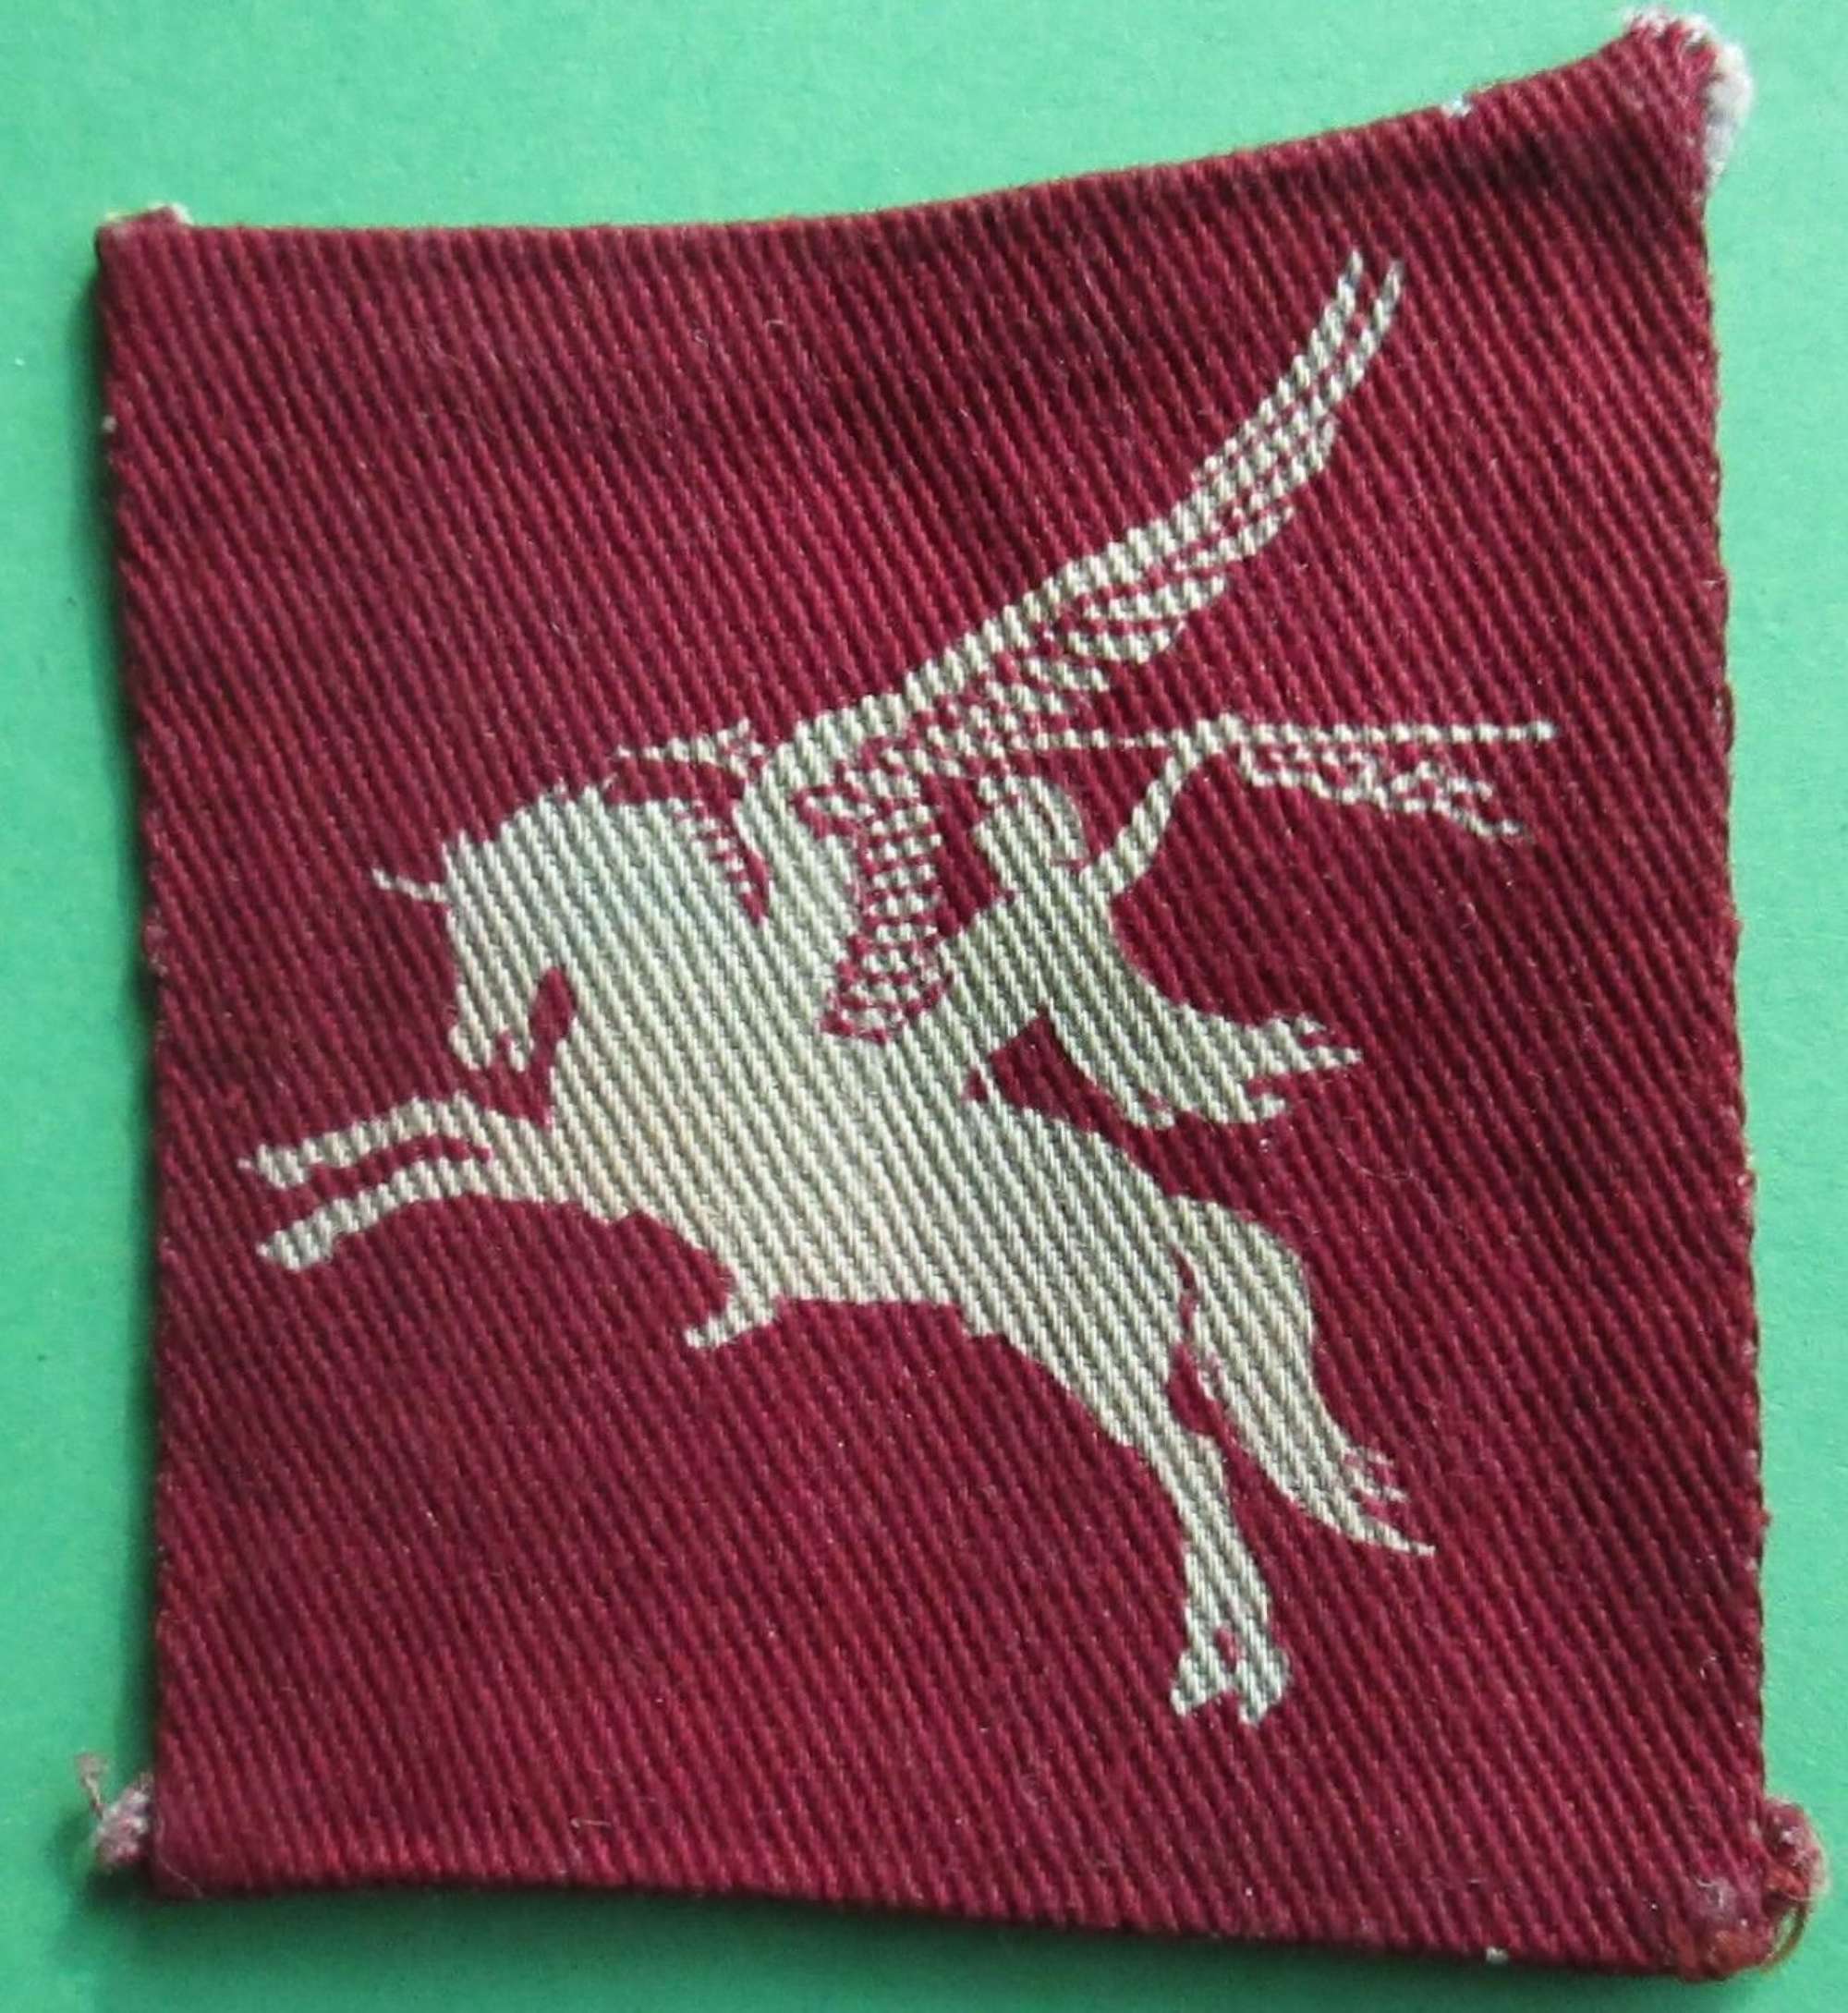 A PRINTED 1ST / 6TH AIRBORNE DIVISION PEGASUS PATCH